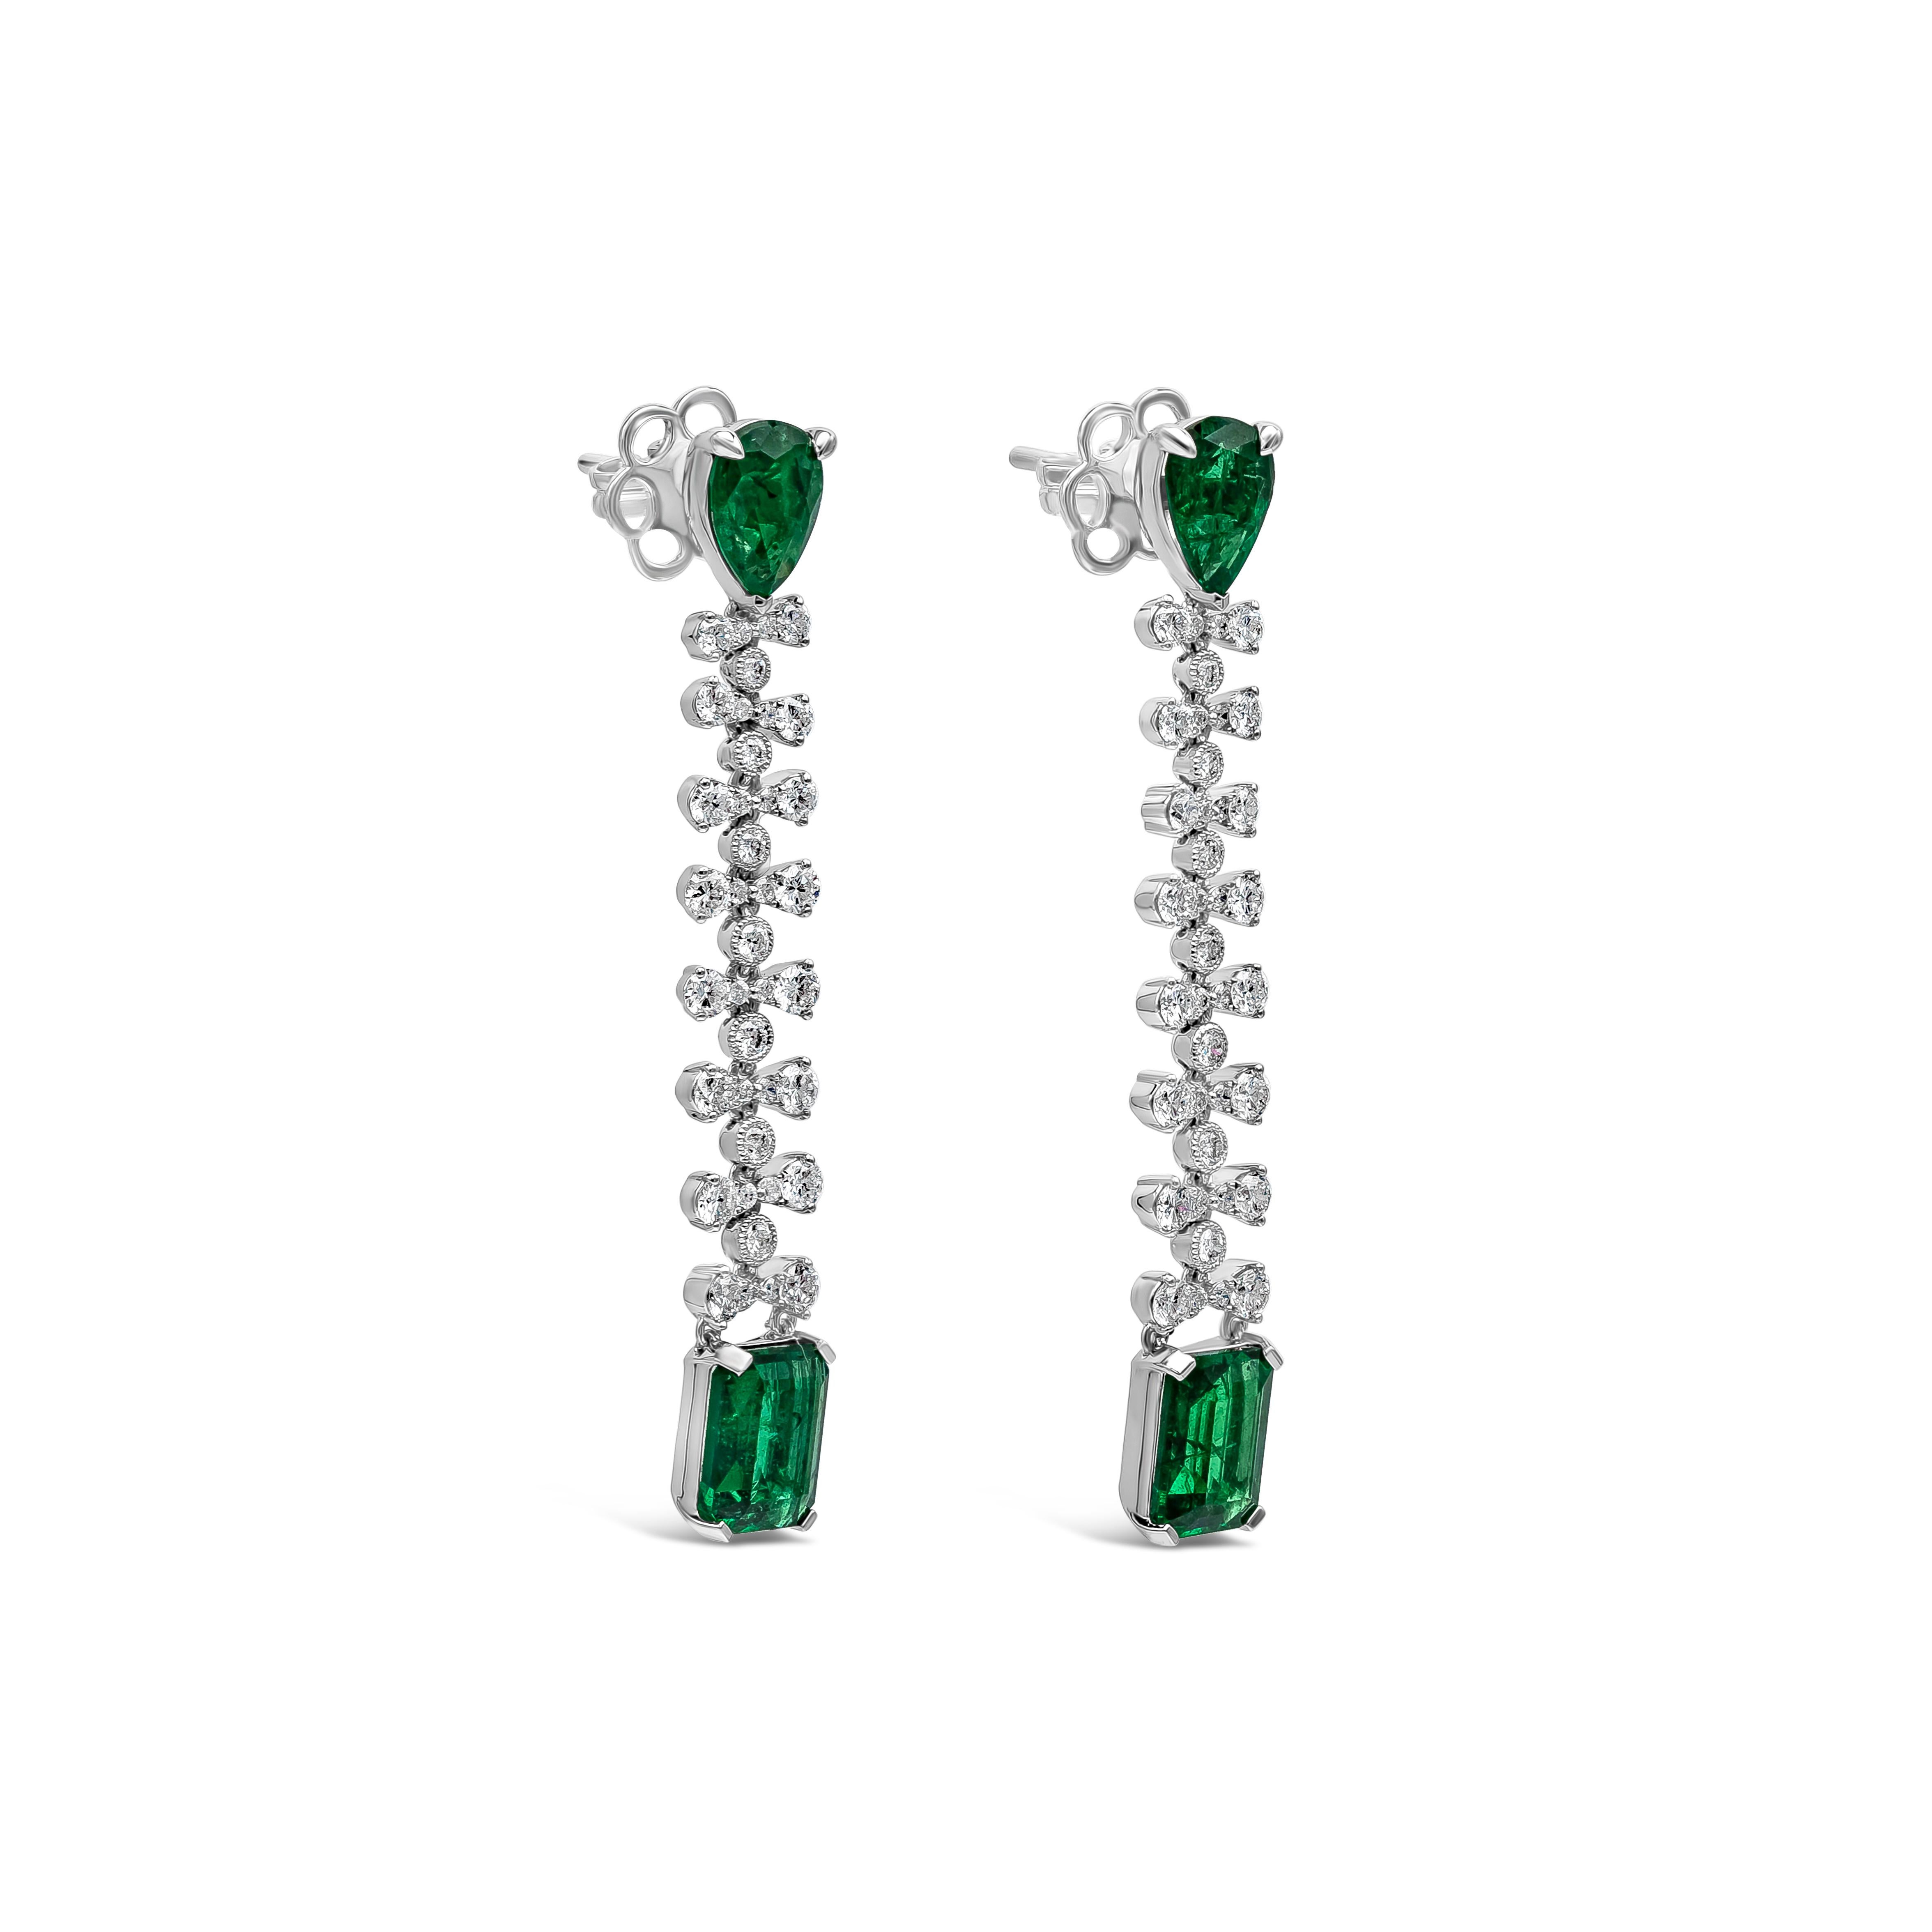 Each earring showcases two oval vibrant green emeralds spaced by round brilliant diamonds, set in a dangle style earrings. Green emeralds weigh 3.10 carats total; diamonds weigh 1.02 carats total. Made in 18k white gold.

Style available in